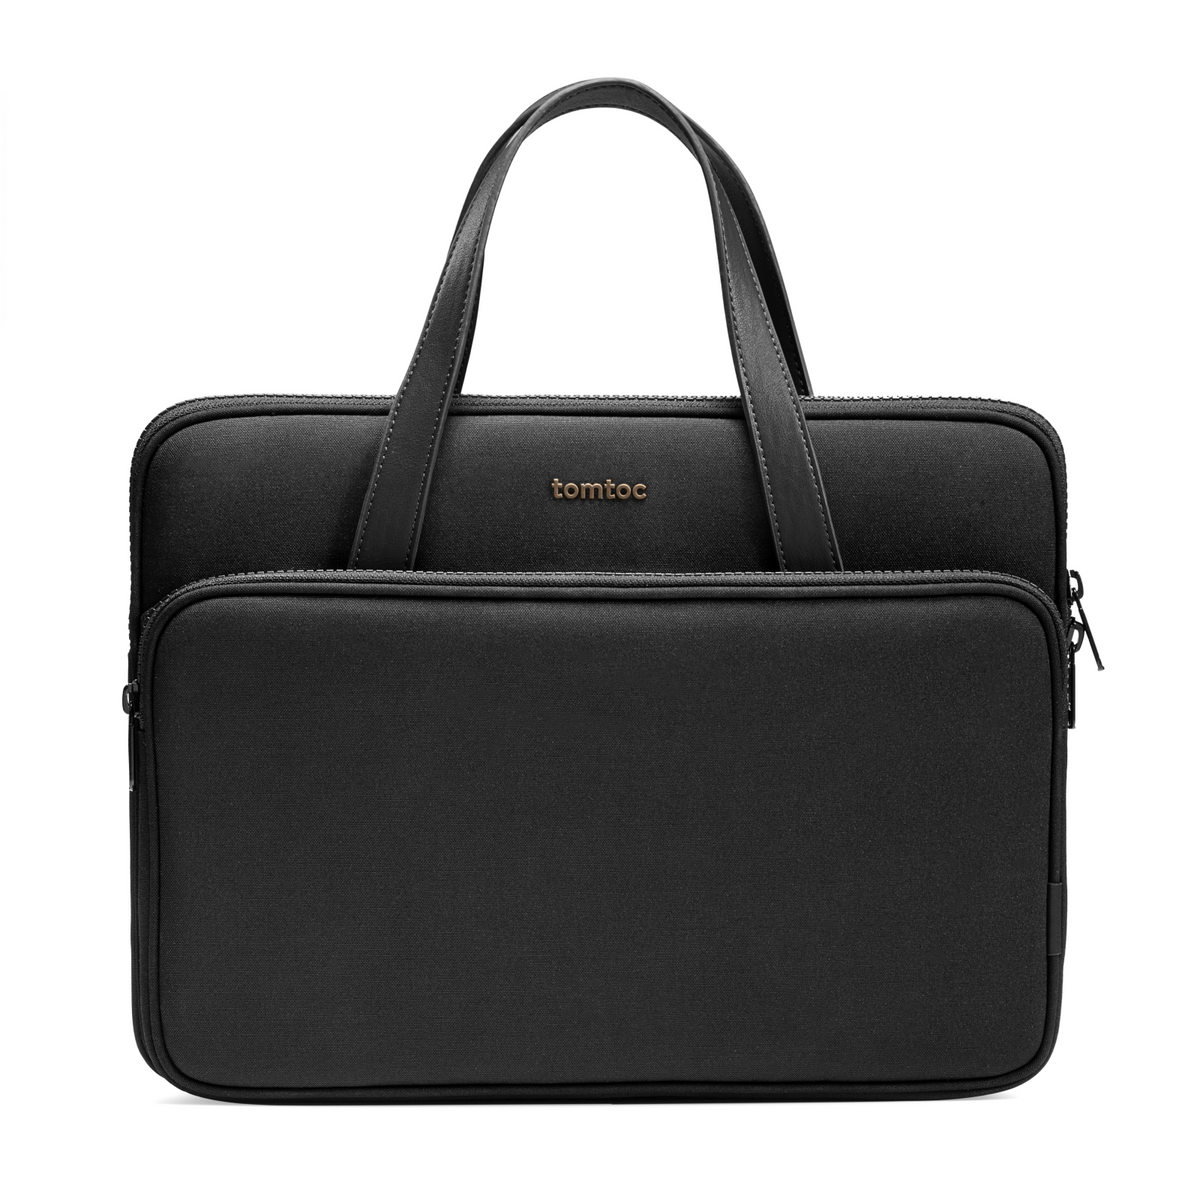 primary_The Her-H21 Laptop Handbag For 16 inch MacBook Pro